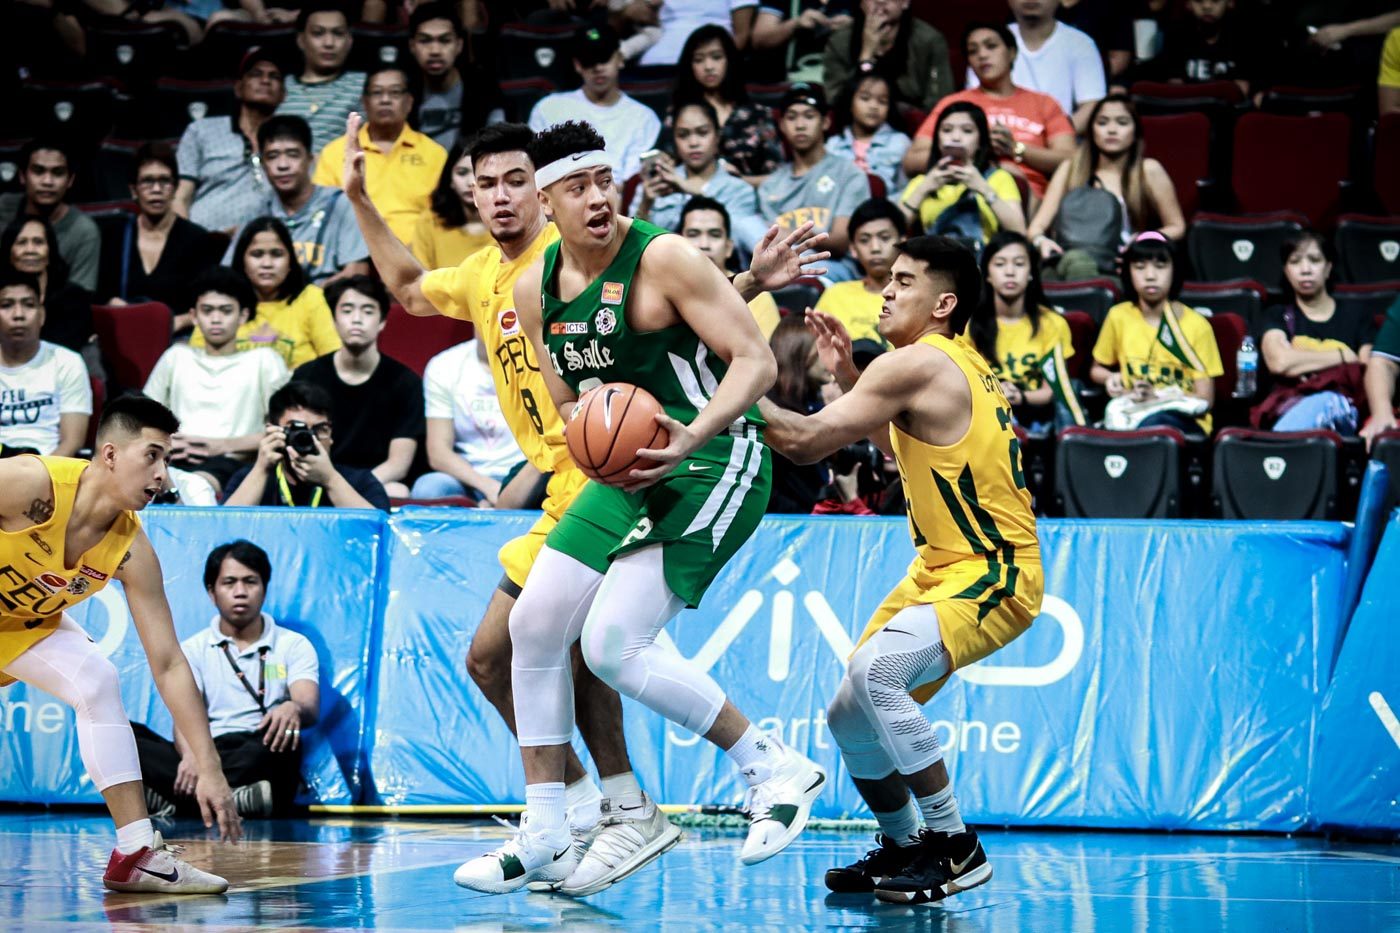 La Salle big man Samuel likely out for two months